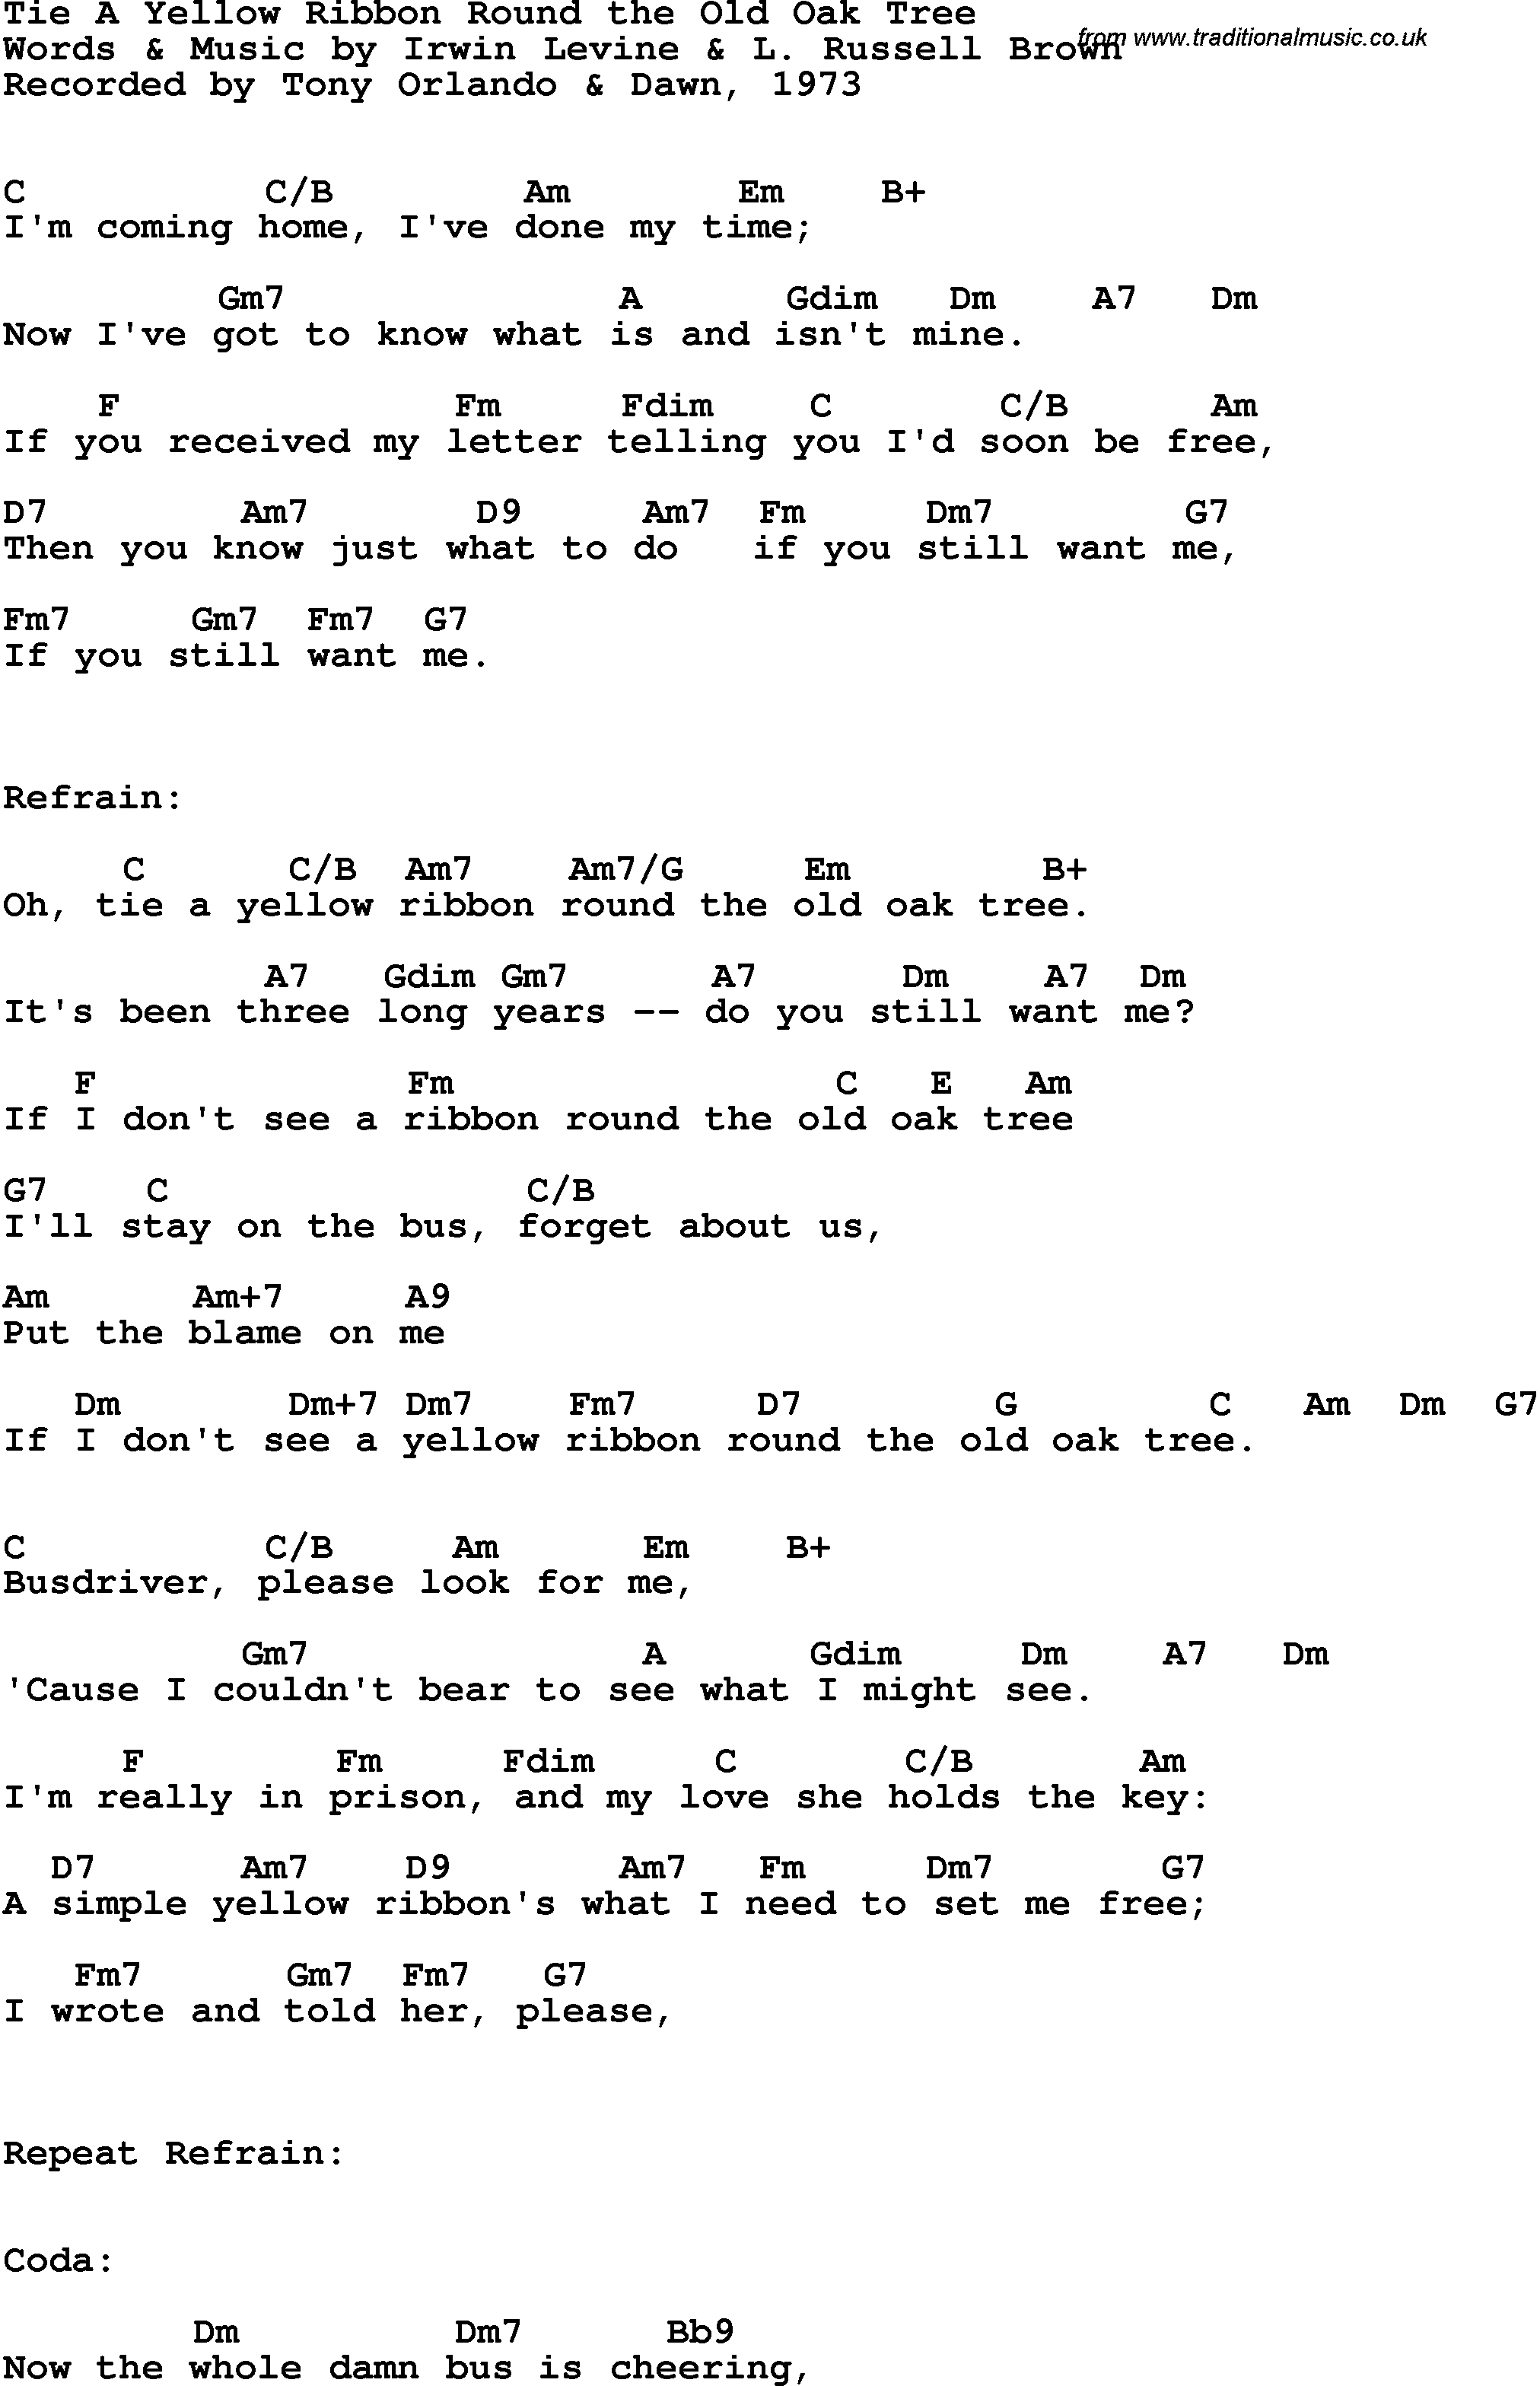 Song Lyrics with guitar chords for Tie A Yellow Ribbon Round The Old Oak Tree - Tony Orlando & Dawn, 1973